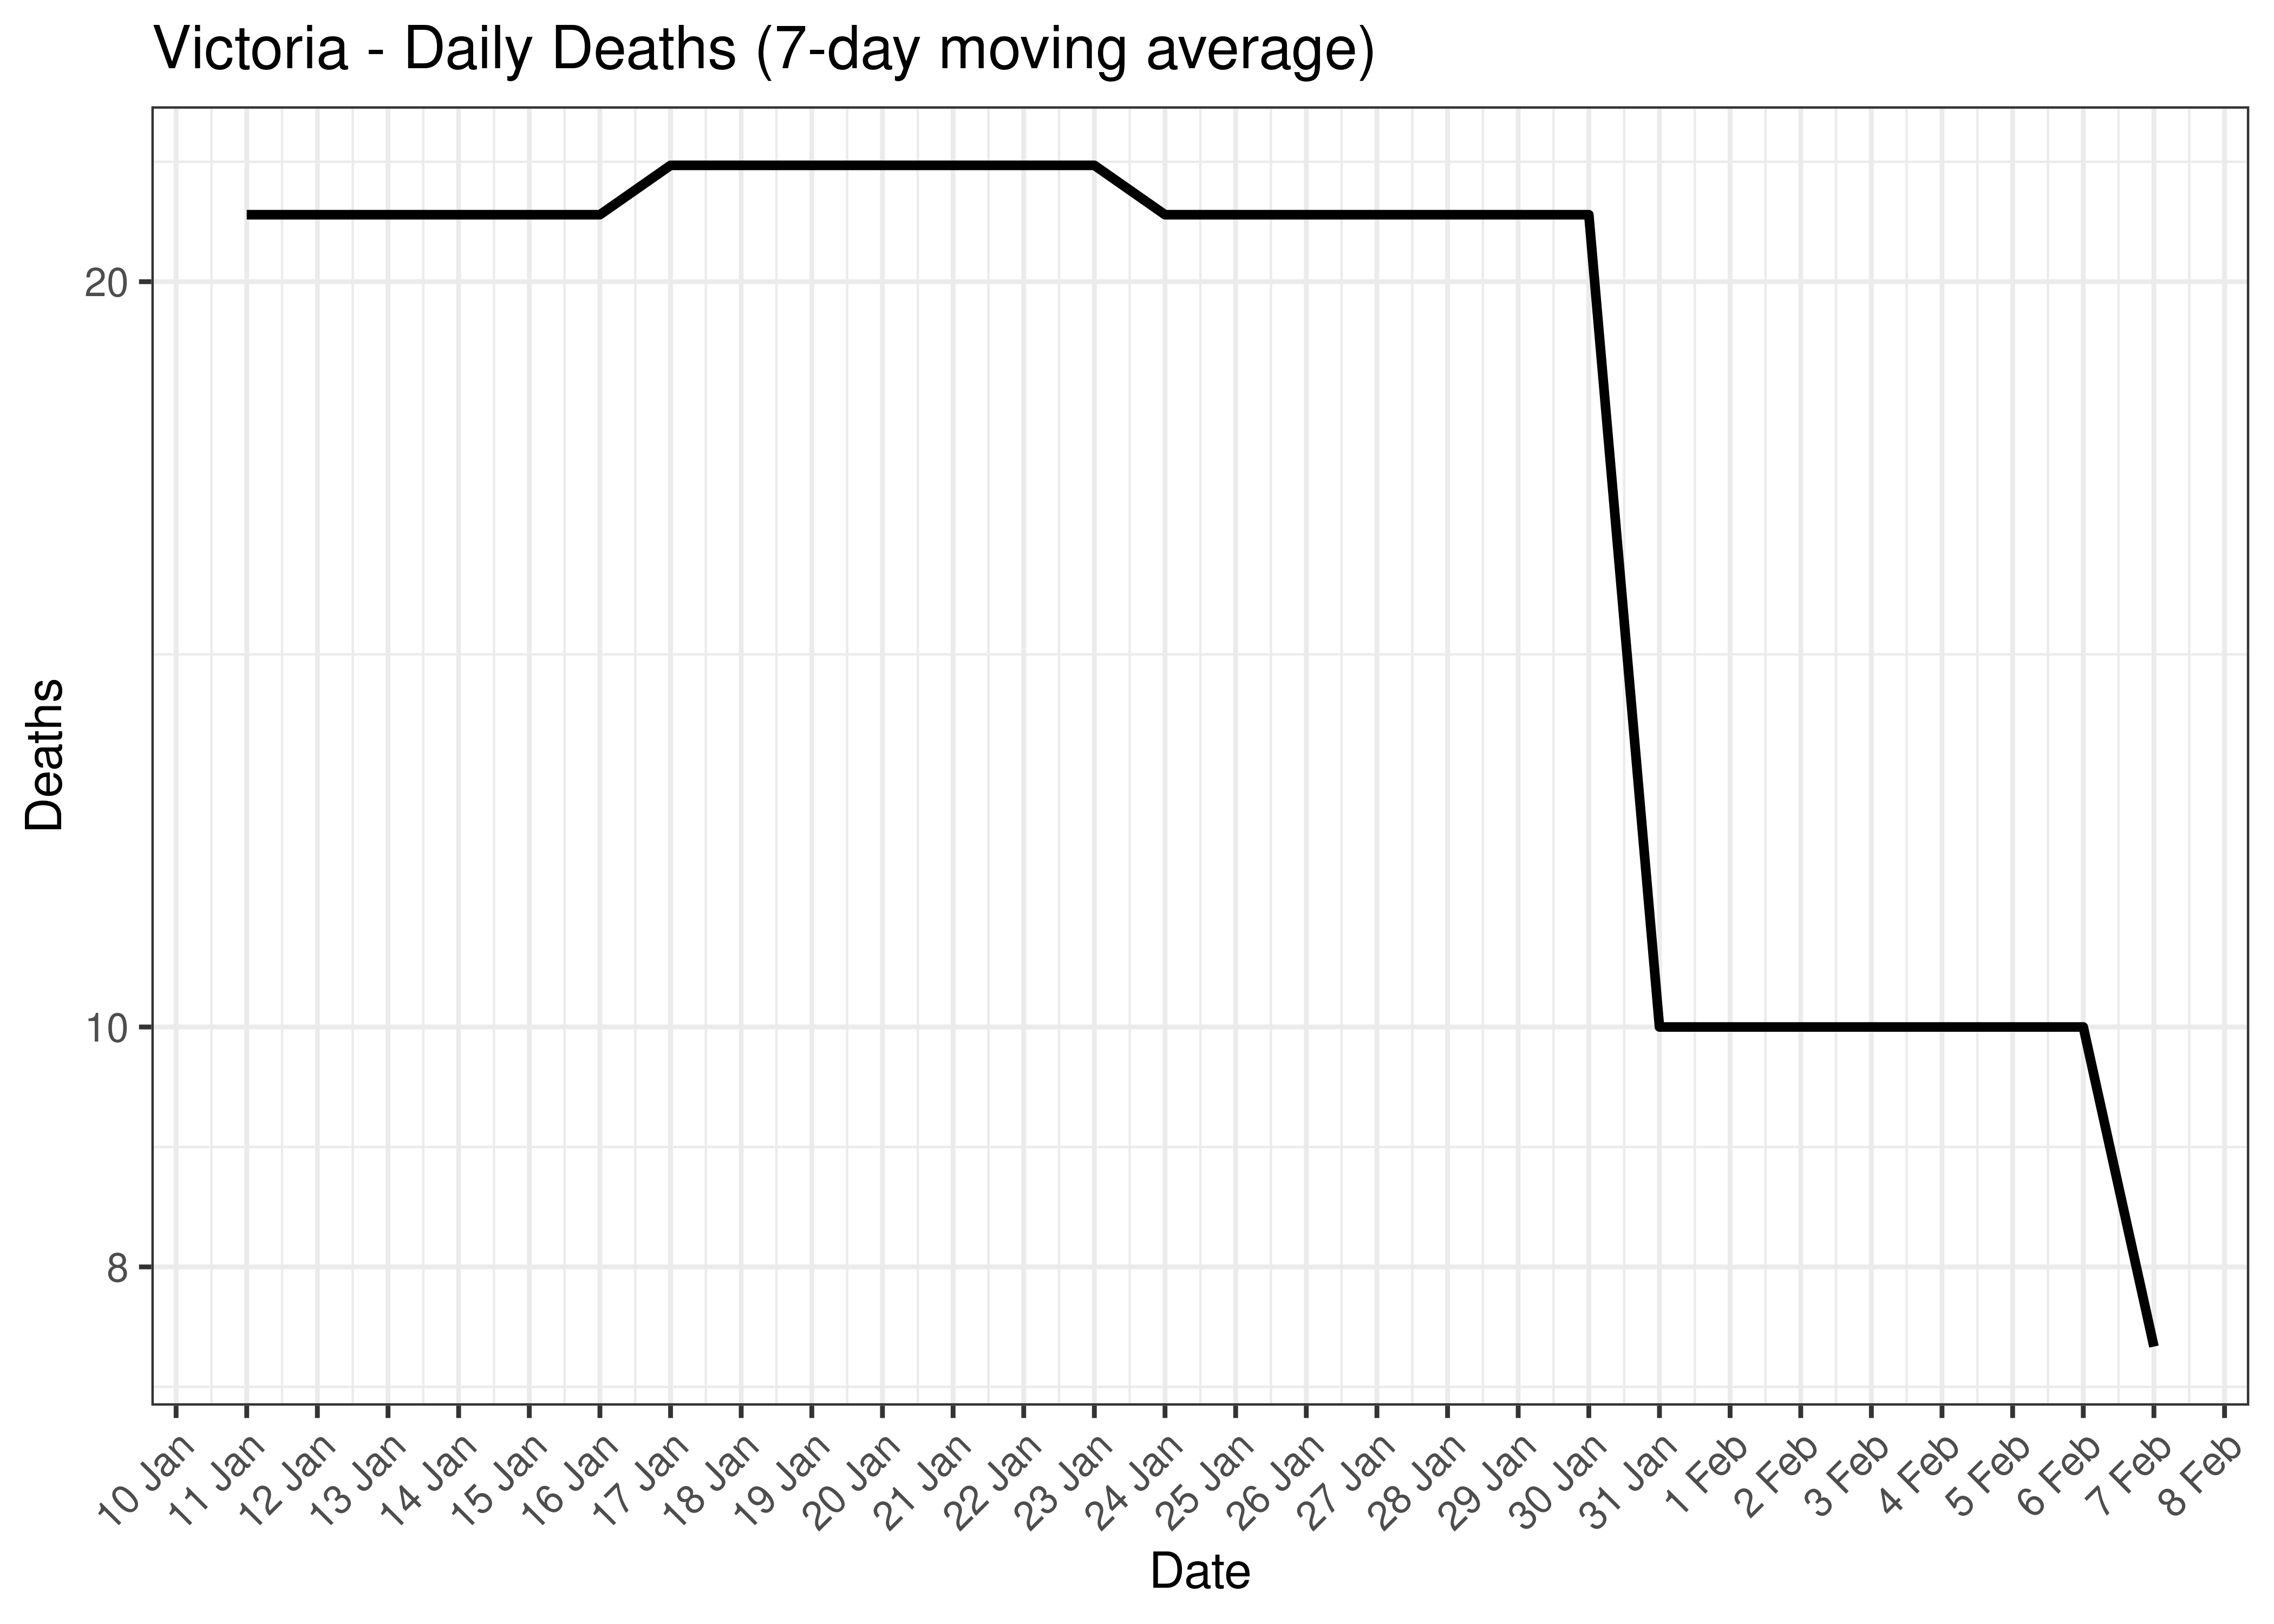 Victoria - Daily Deaths for Last 30-days (7-day moving average)